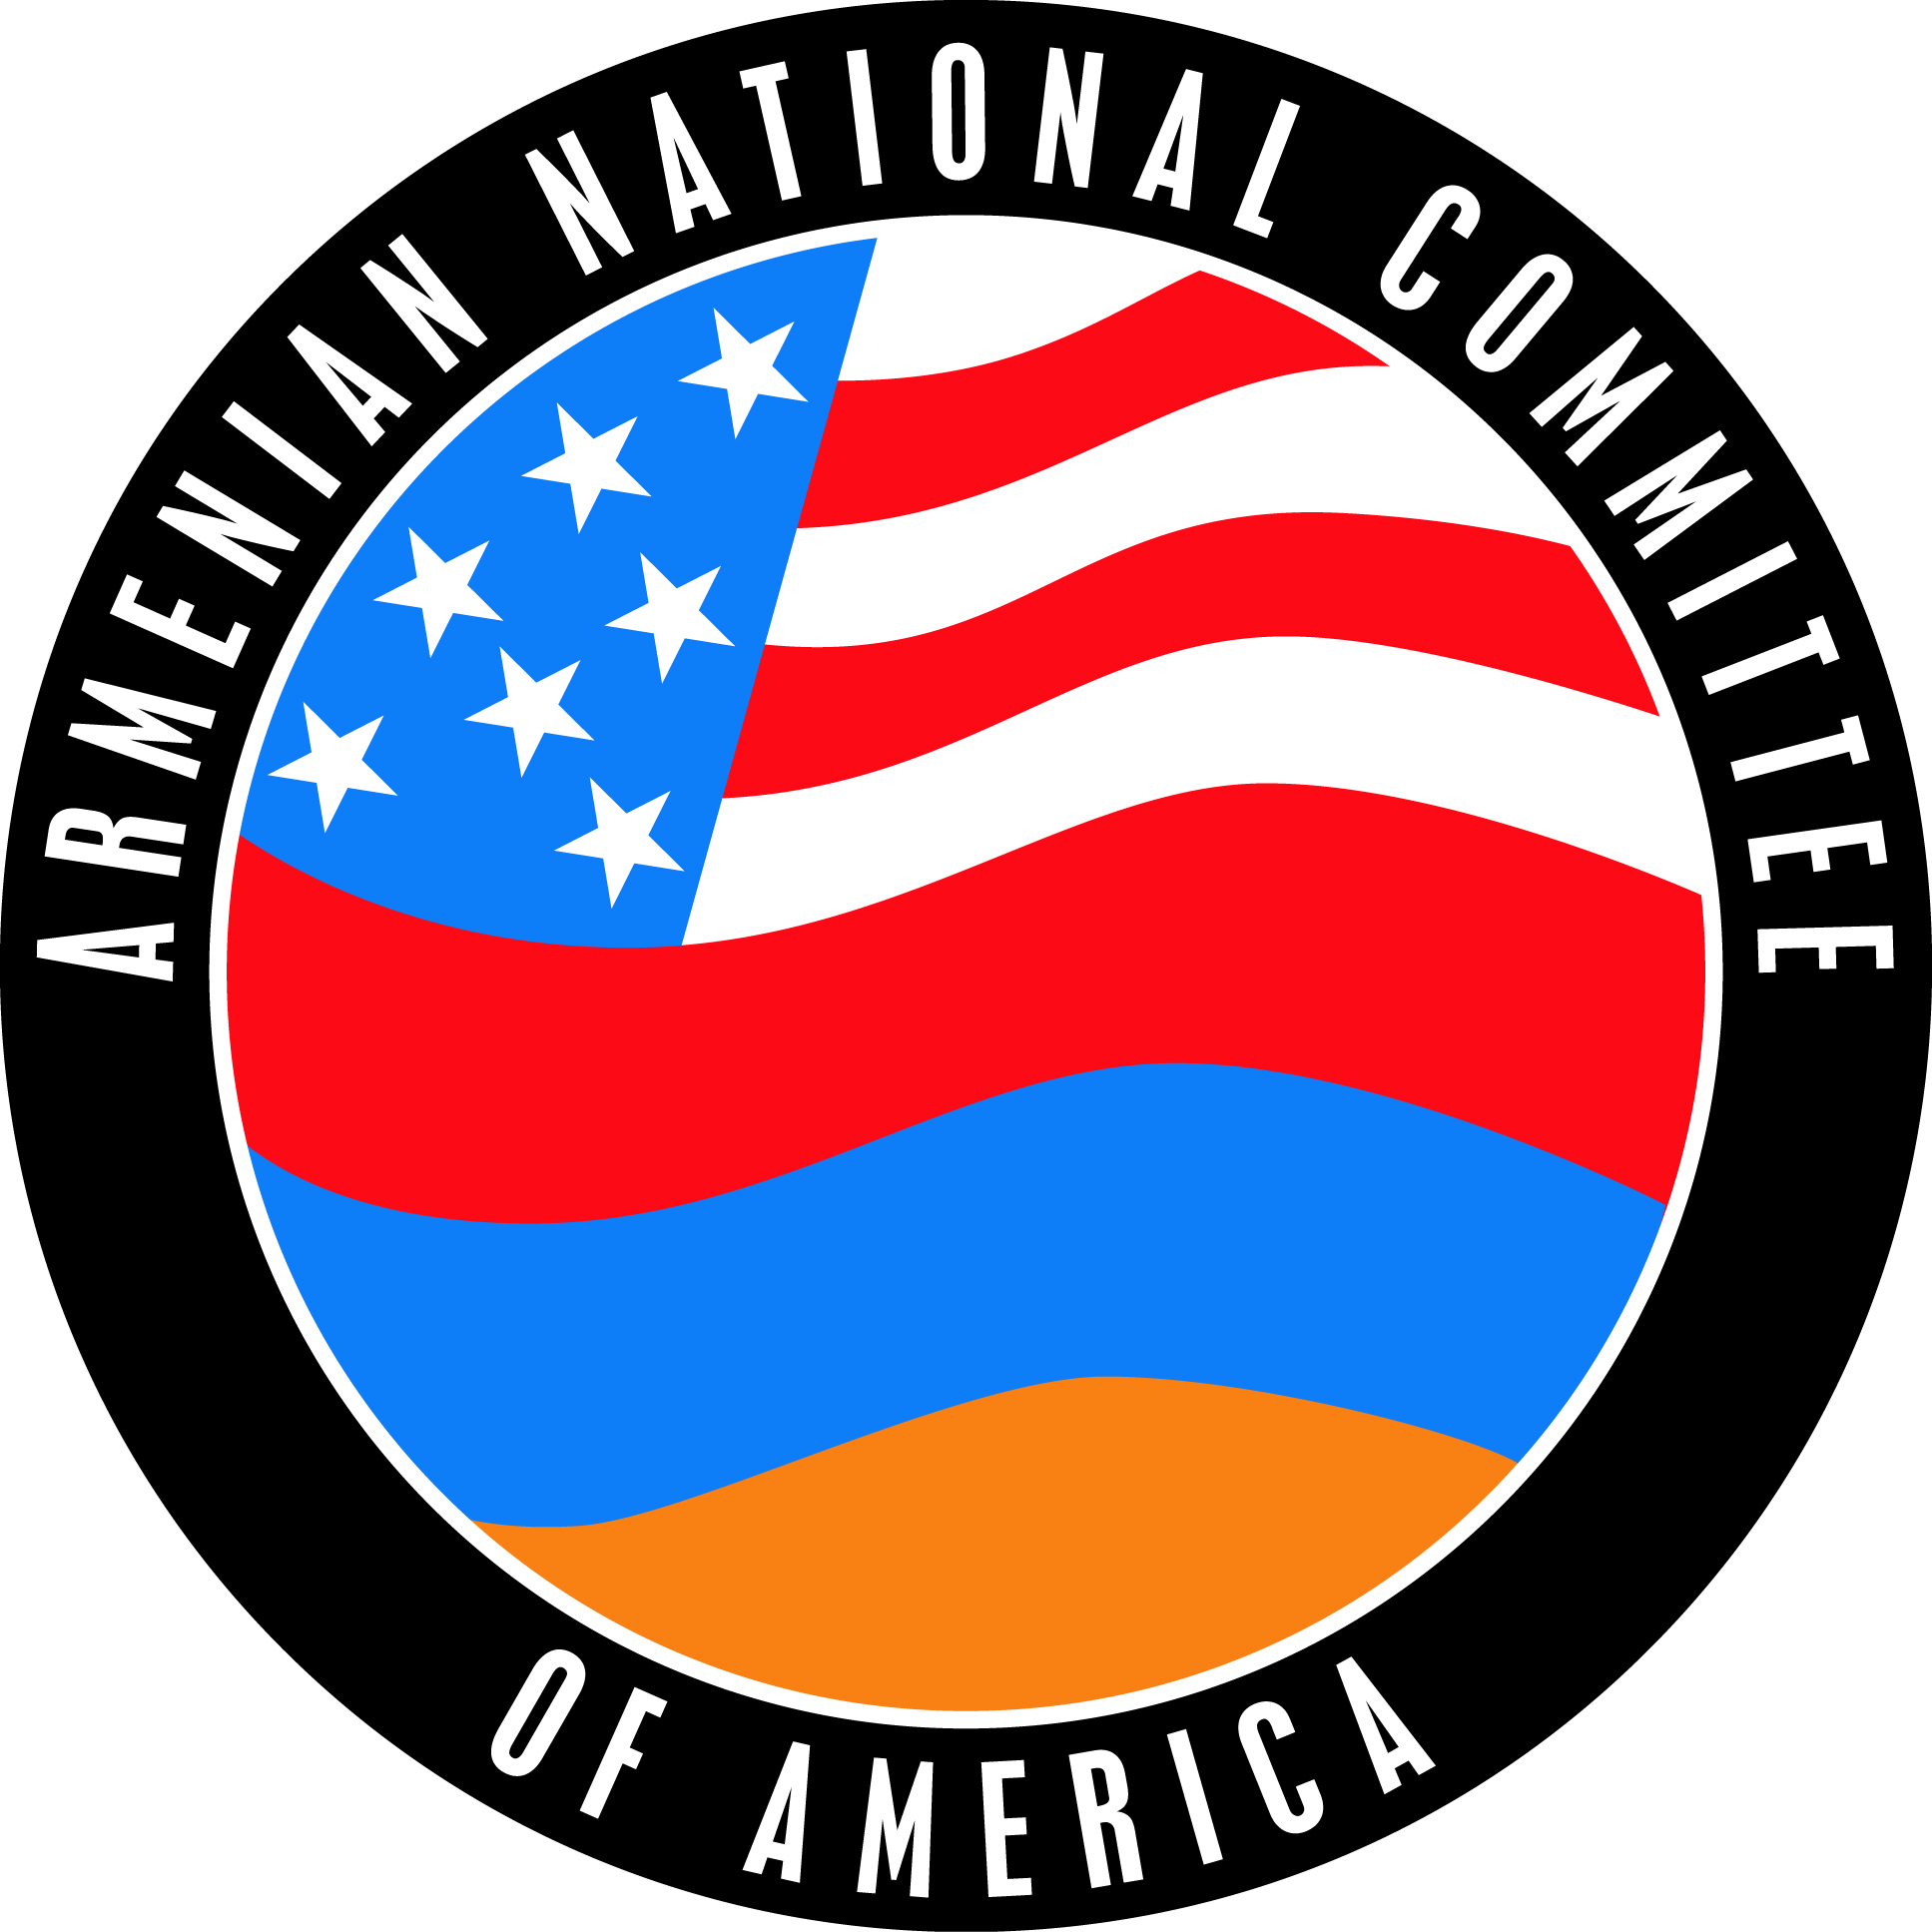 ANCA Reaffirms Support for OSCE Minsk Group, Rejects Madrid Principles as a Flawed Plan for Lasting Peace